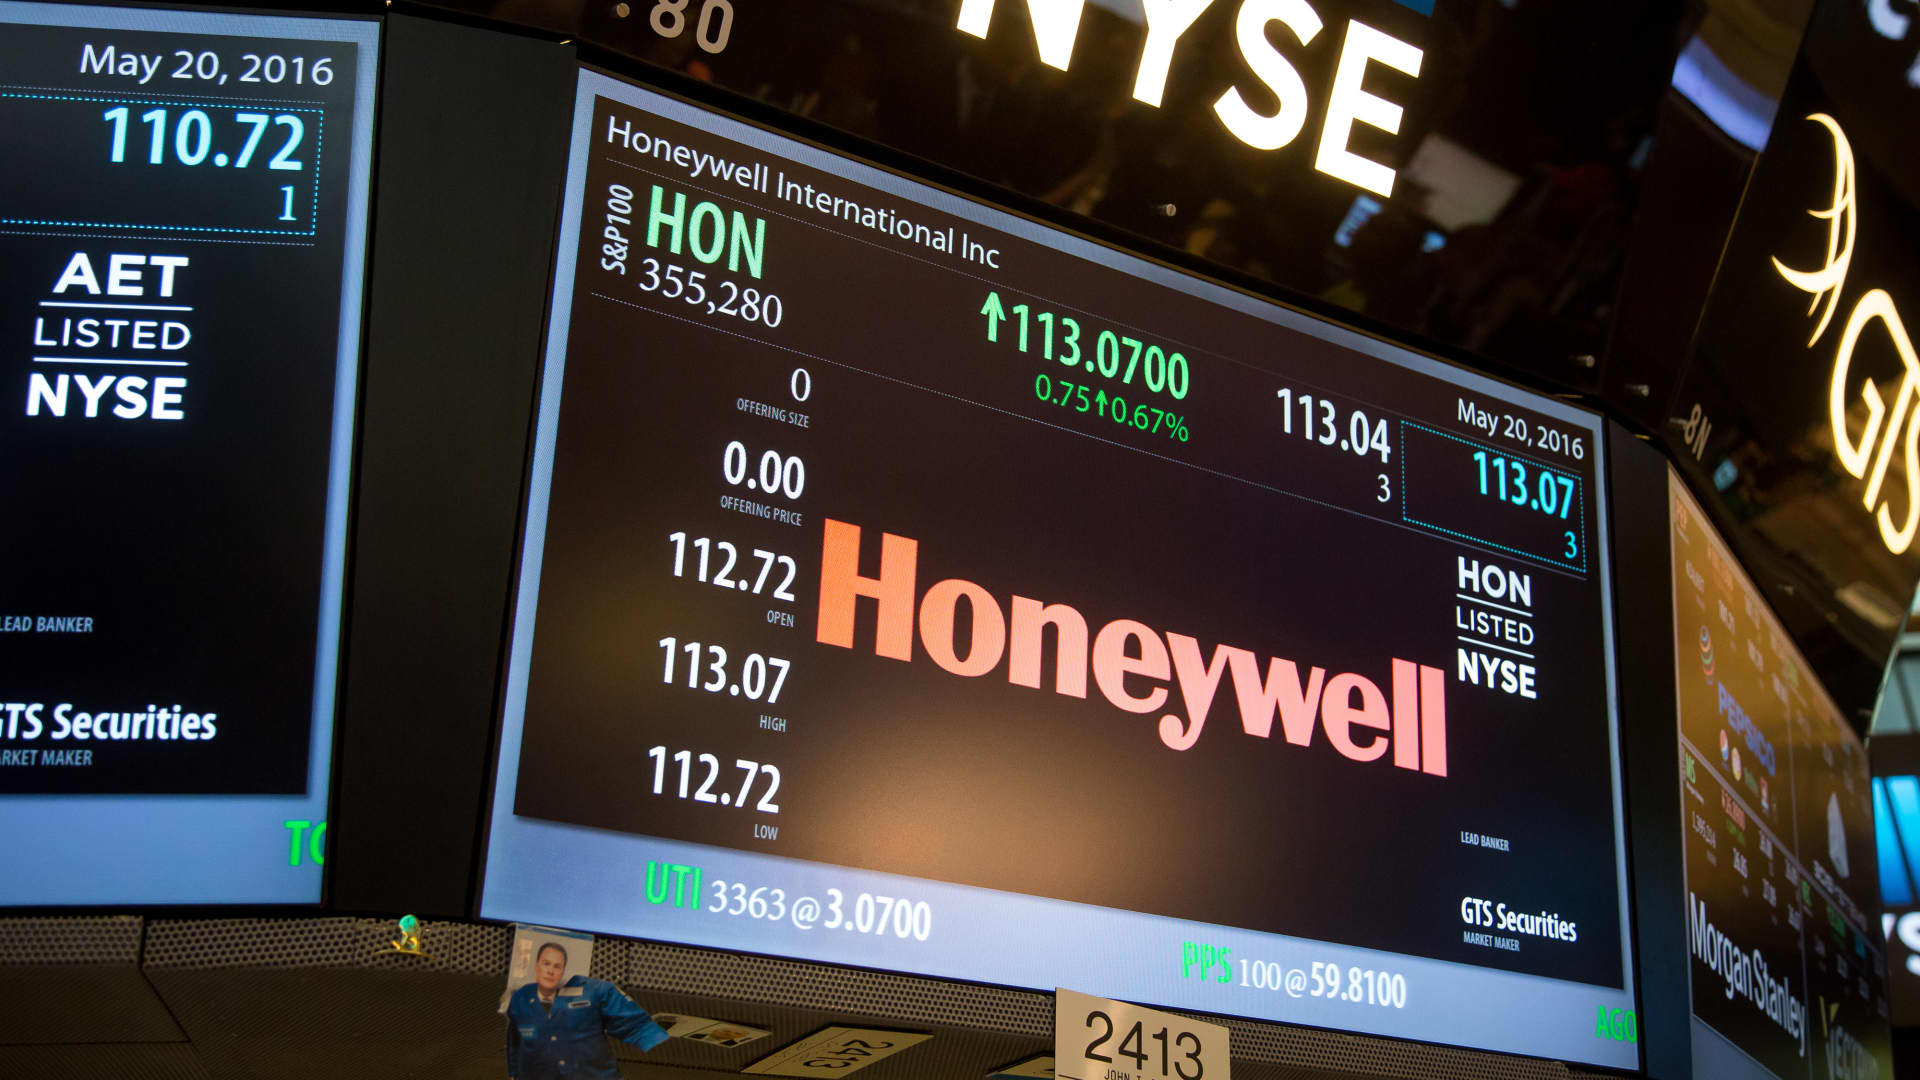 we’re-lowering-our-honeywell-price-target-after-earnings.-the-risk-reward-is-still-favorable